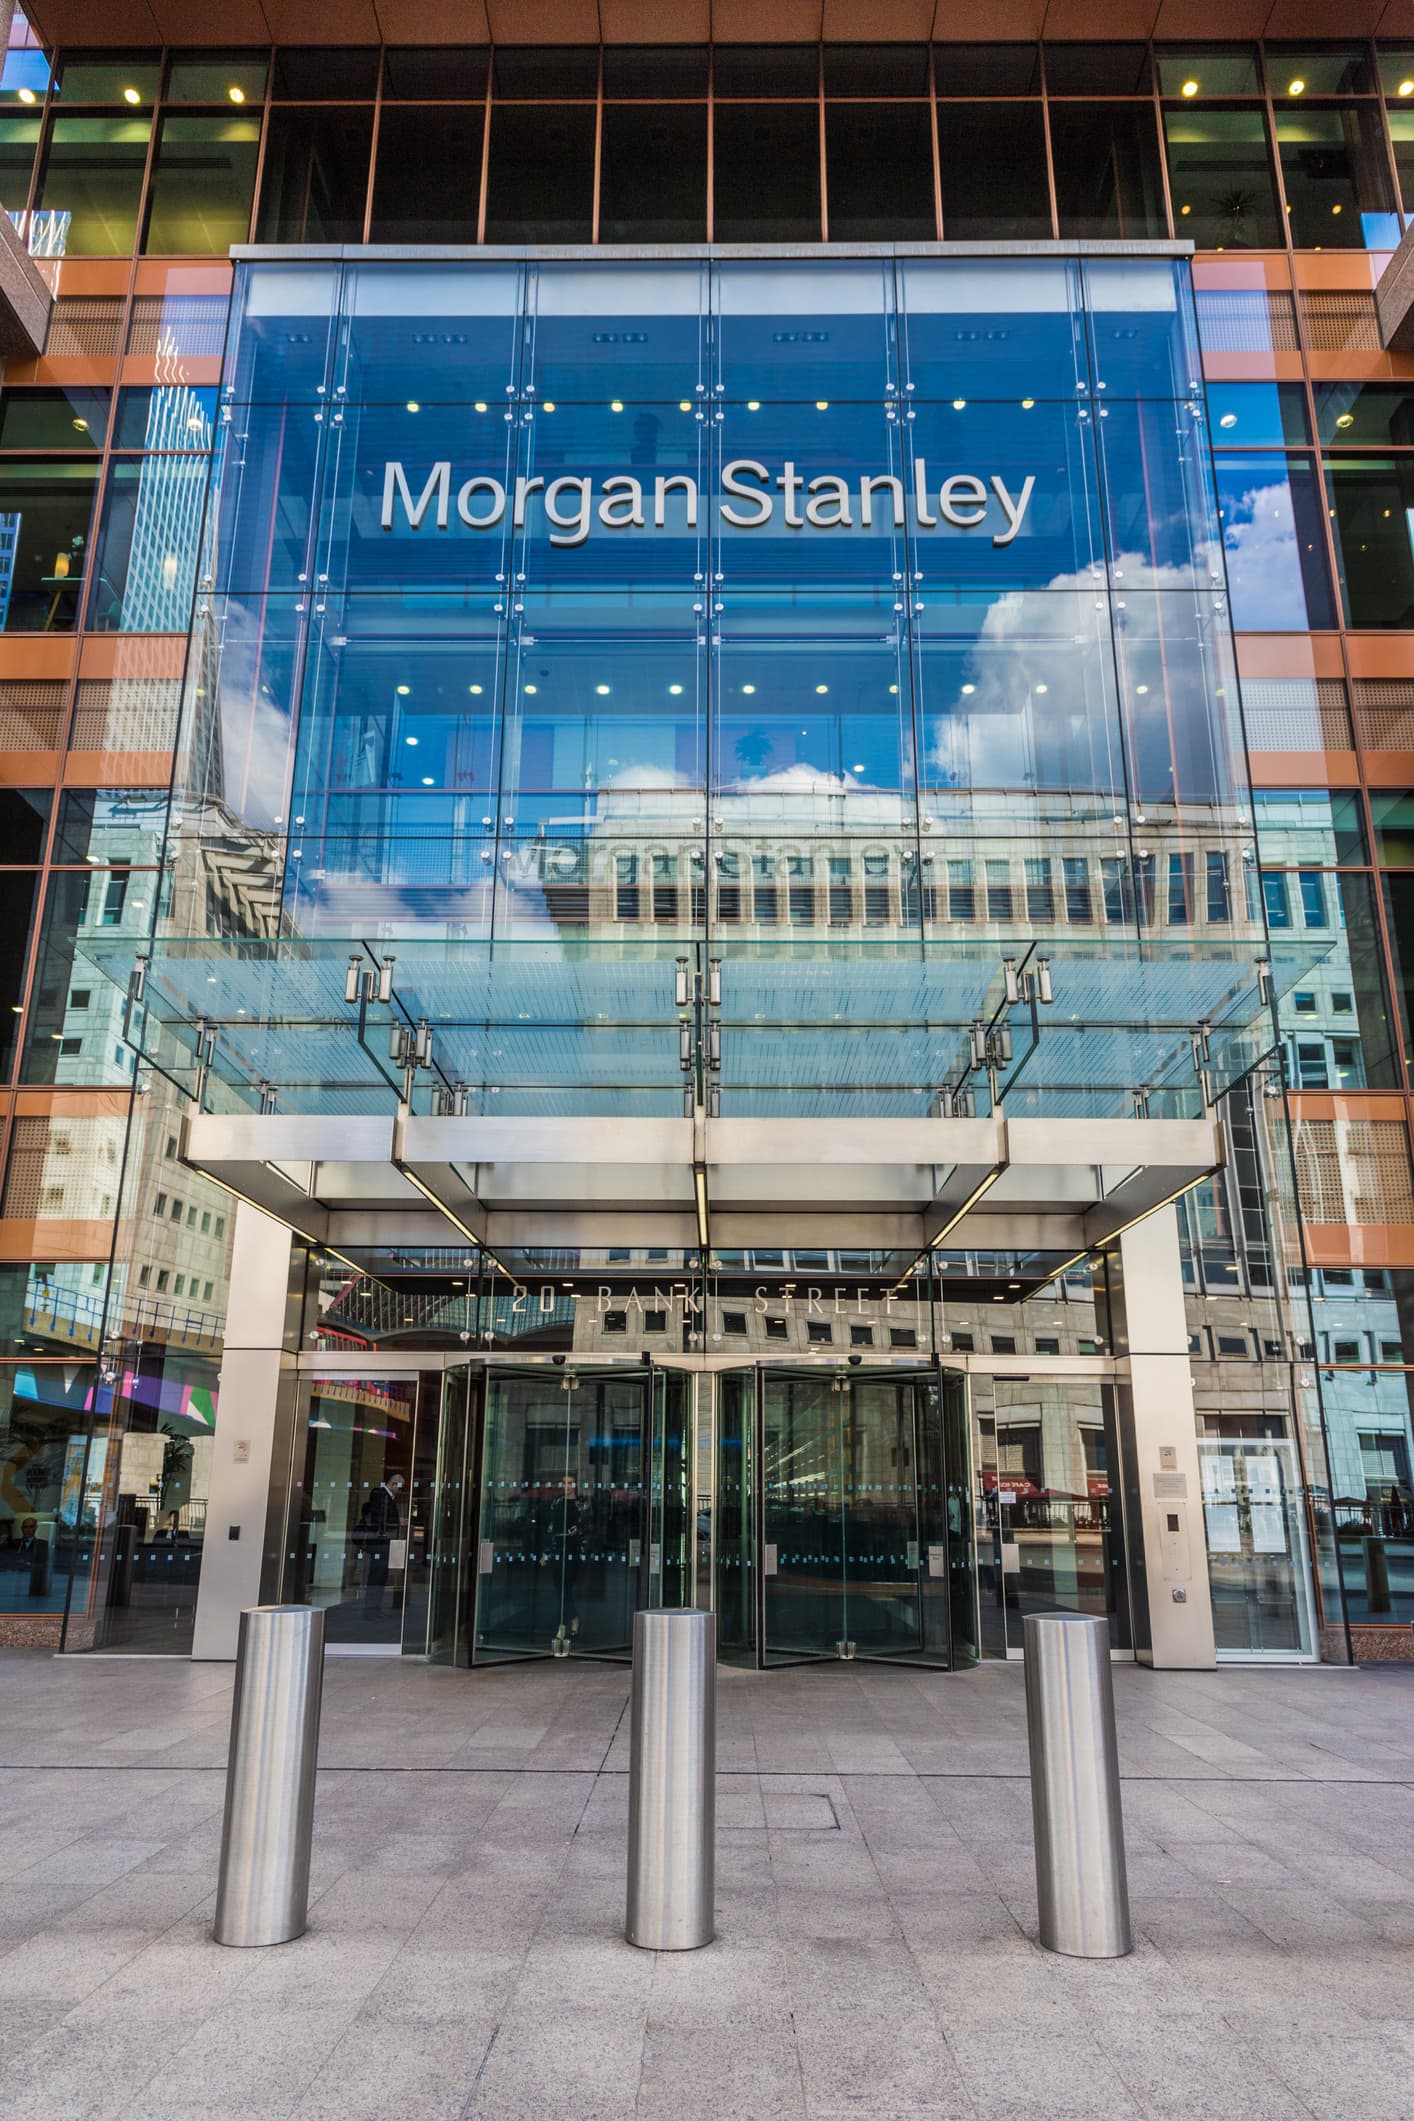 Morgan Stanley is the first major US bank to offer wealthy customers access to bitcoin funds